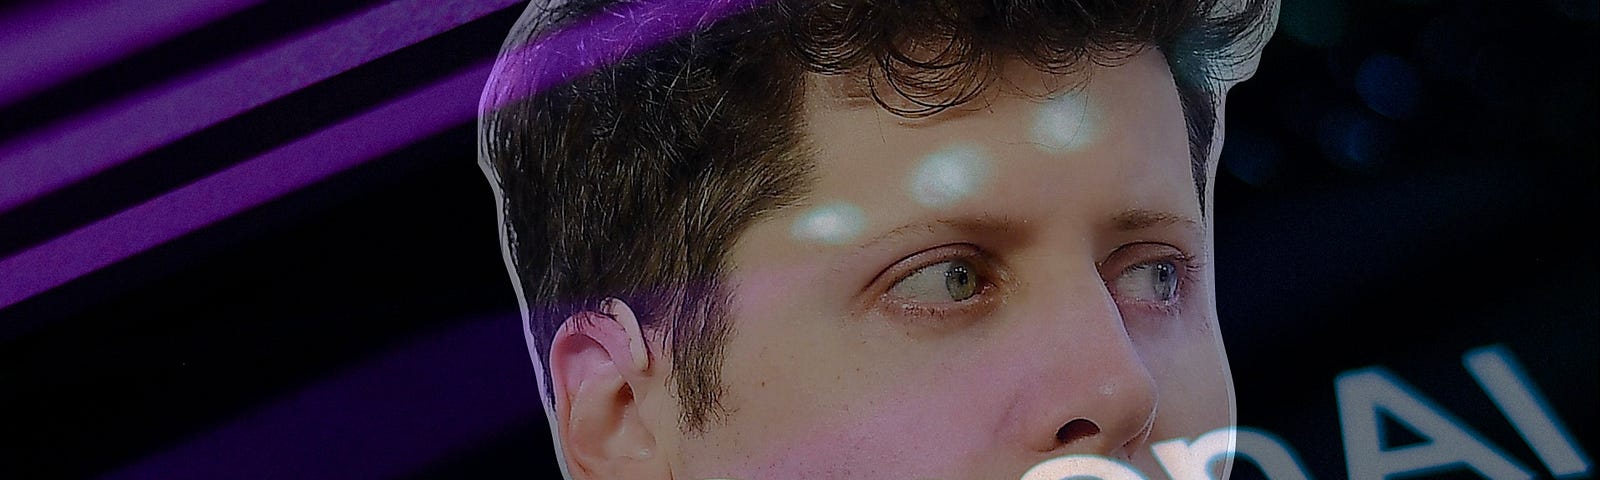 IMAGE: A photo of Sam Altman (photo by Steve Jennings/Getty Images for TechCrunch) overshadowed by a semitransparent version of the OpenAI logo